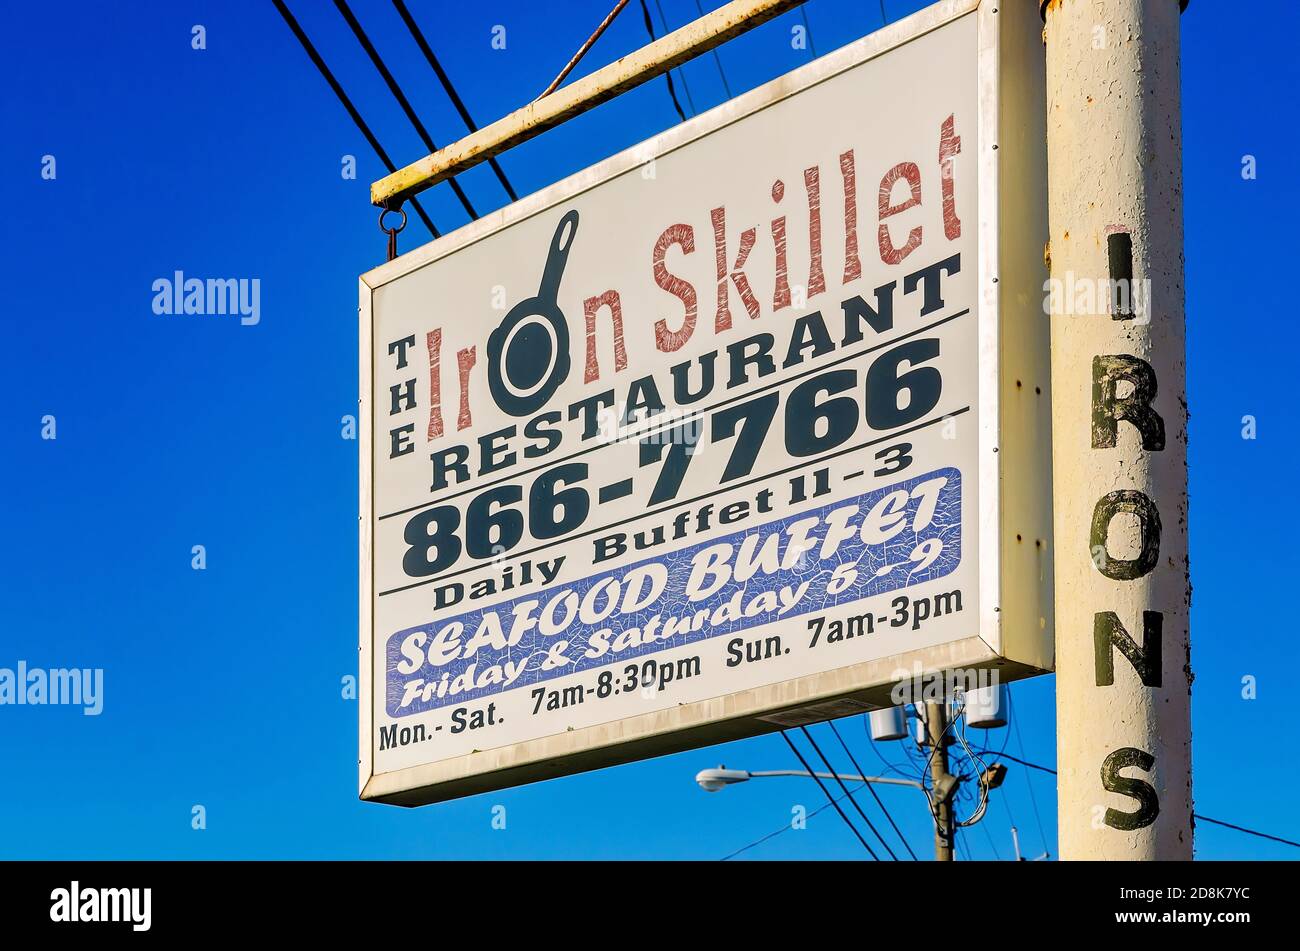 A sign advertises The Iron Skillet restaurant, Oct. 29, 2020, in Citronelle, Alabama. The restaurant specializes in Southern cooking. Stock Photo